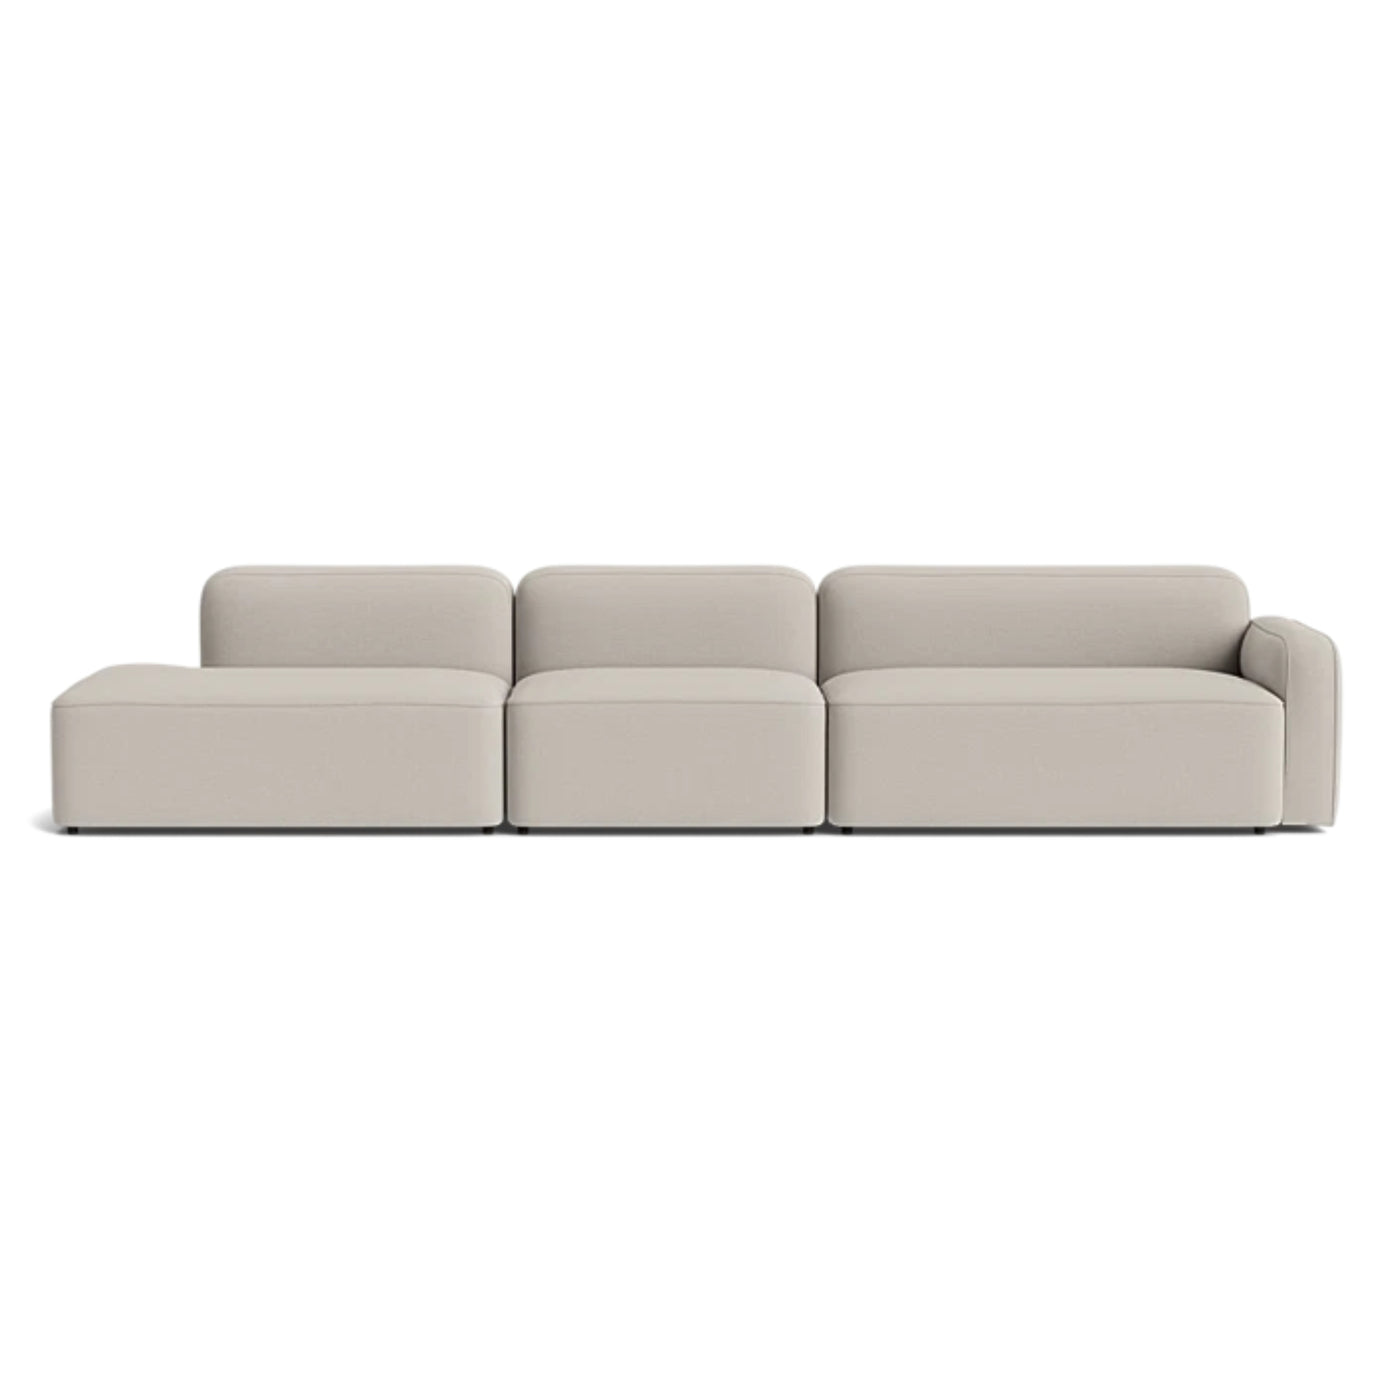 Normann Copenhagen Rope 3 Seater Modular Sofa. Made to order at someday designs. #colour_steelcut-trio-213